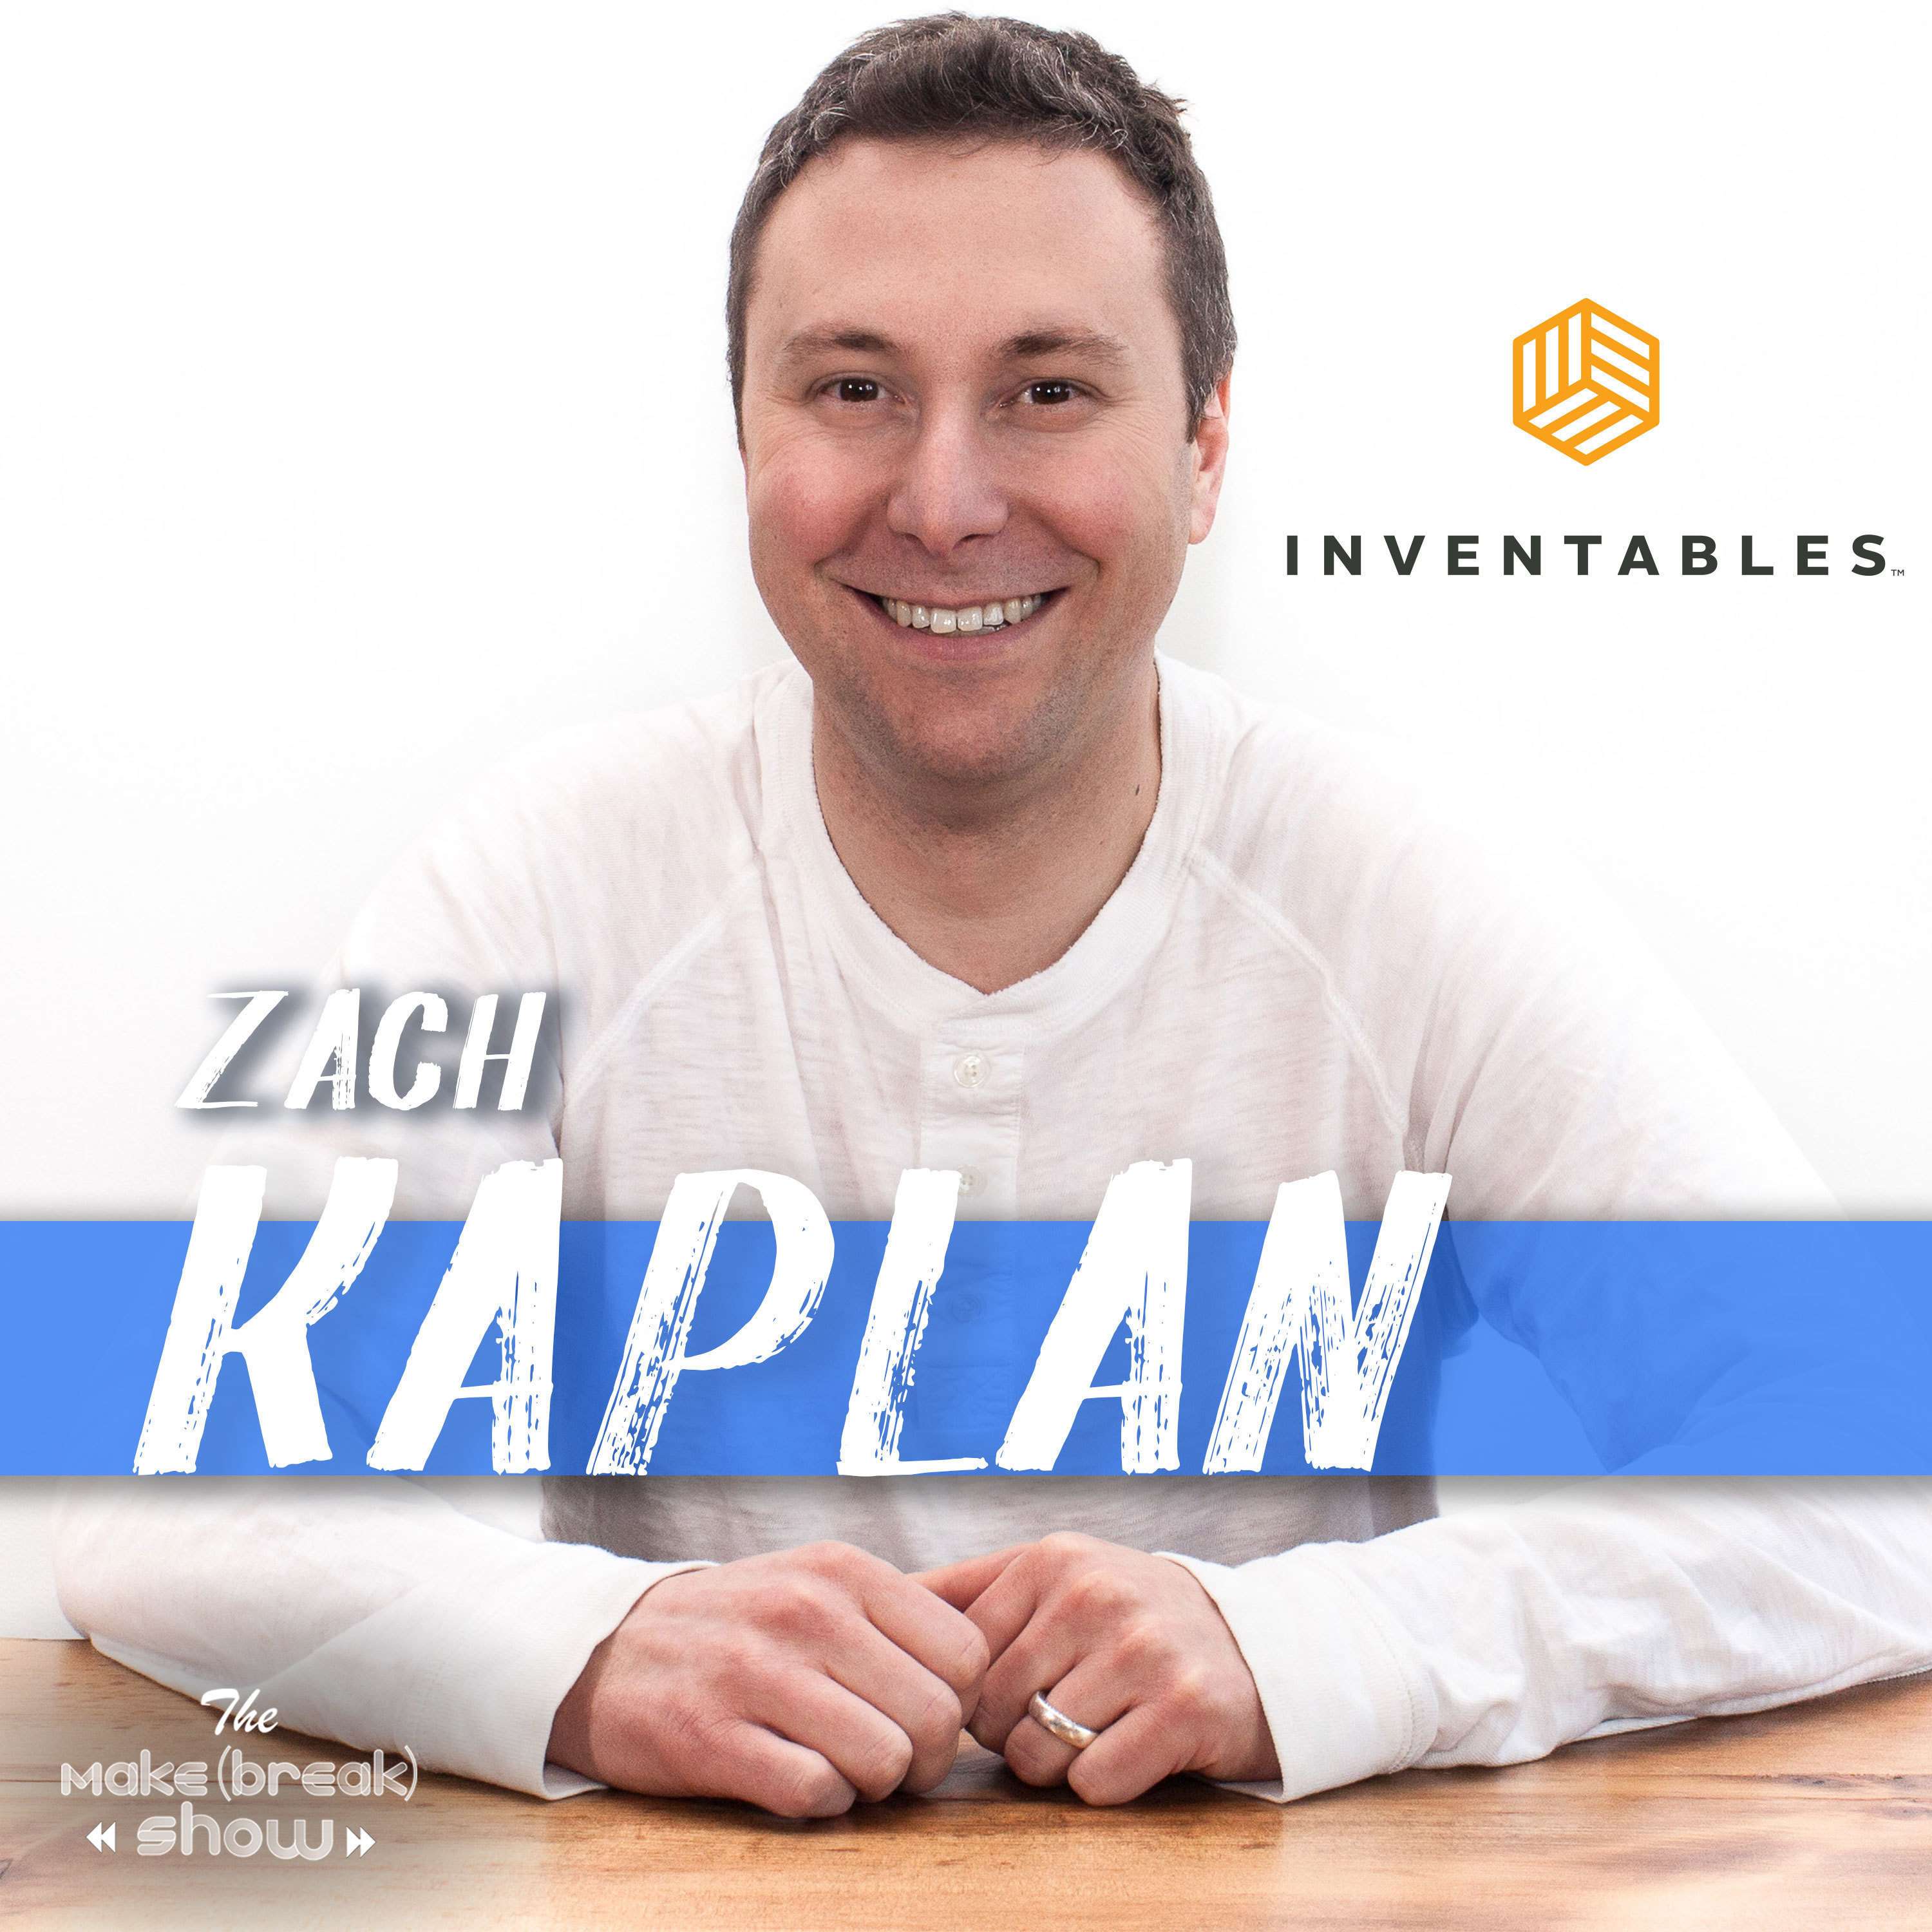 054: Digital Manufacturing, CNC and more with Inventables Zach Kaplan